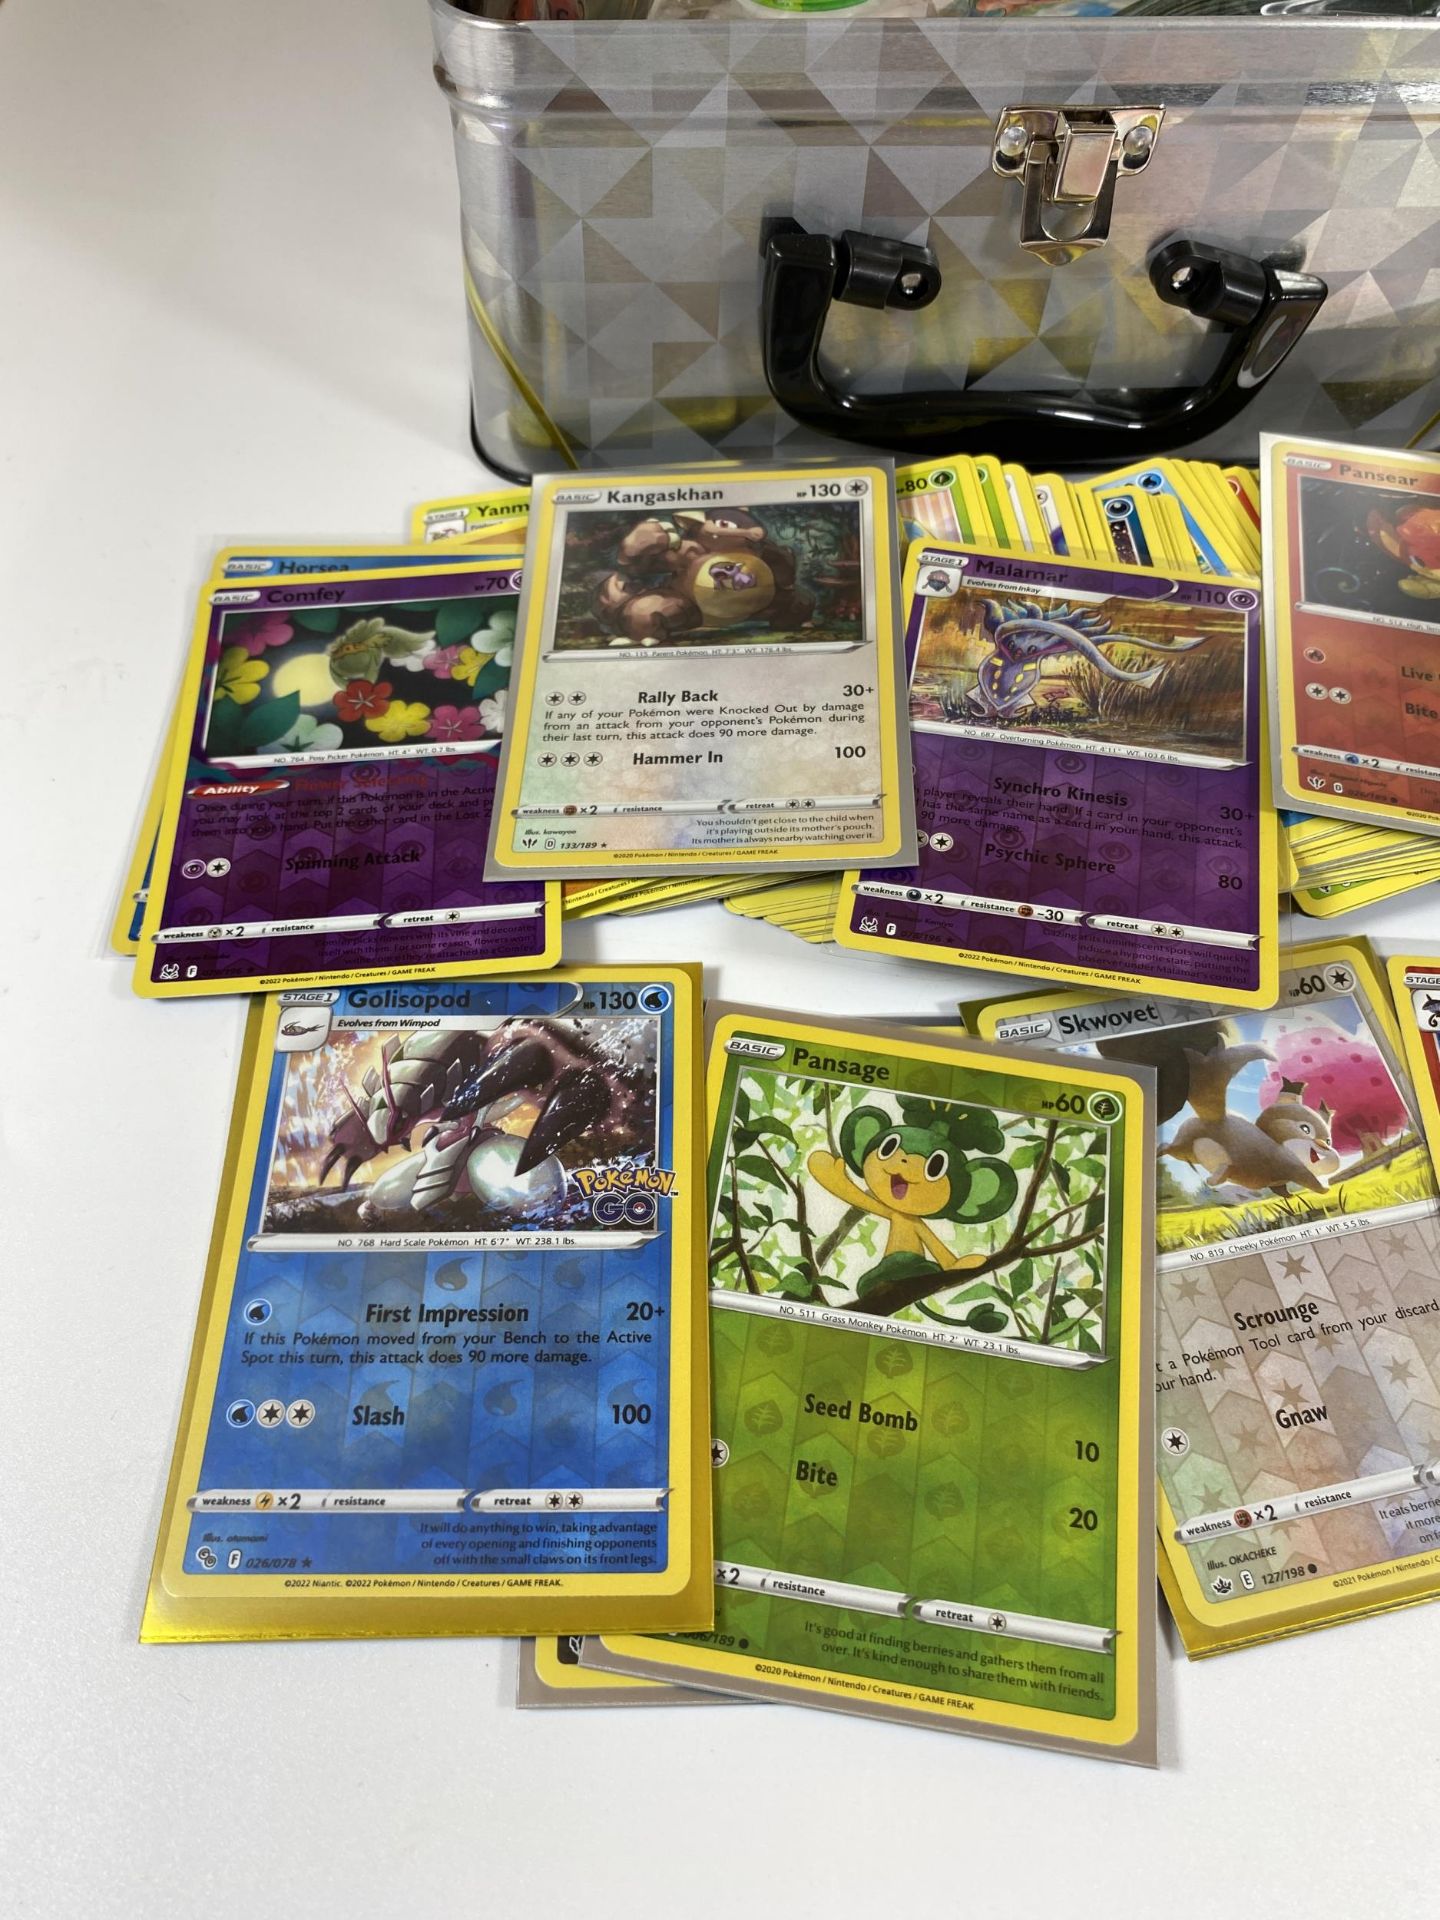 A POKEMON TIN TRAINER BOX FULL OF CARDS, GAME COUNTERS, RARES, HOLOS ETC - Image 4 of 5